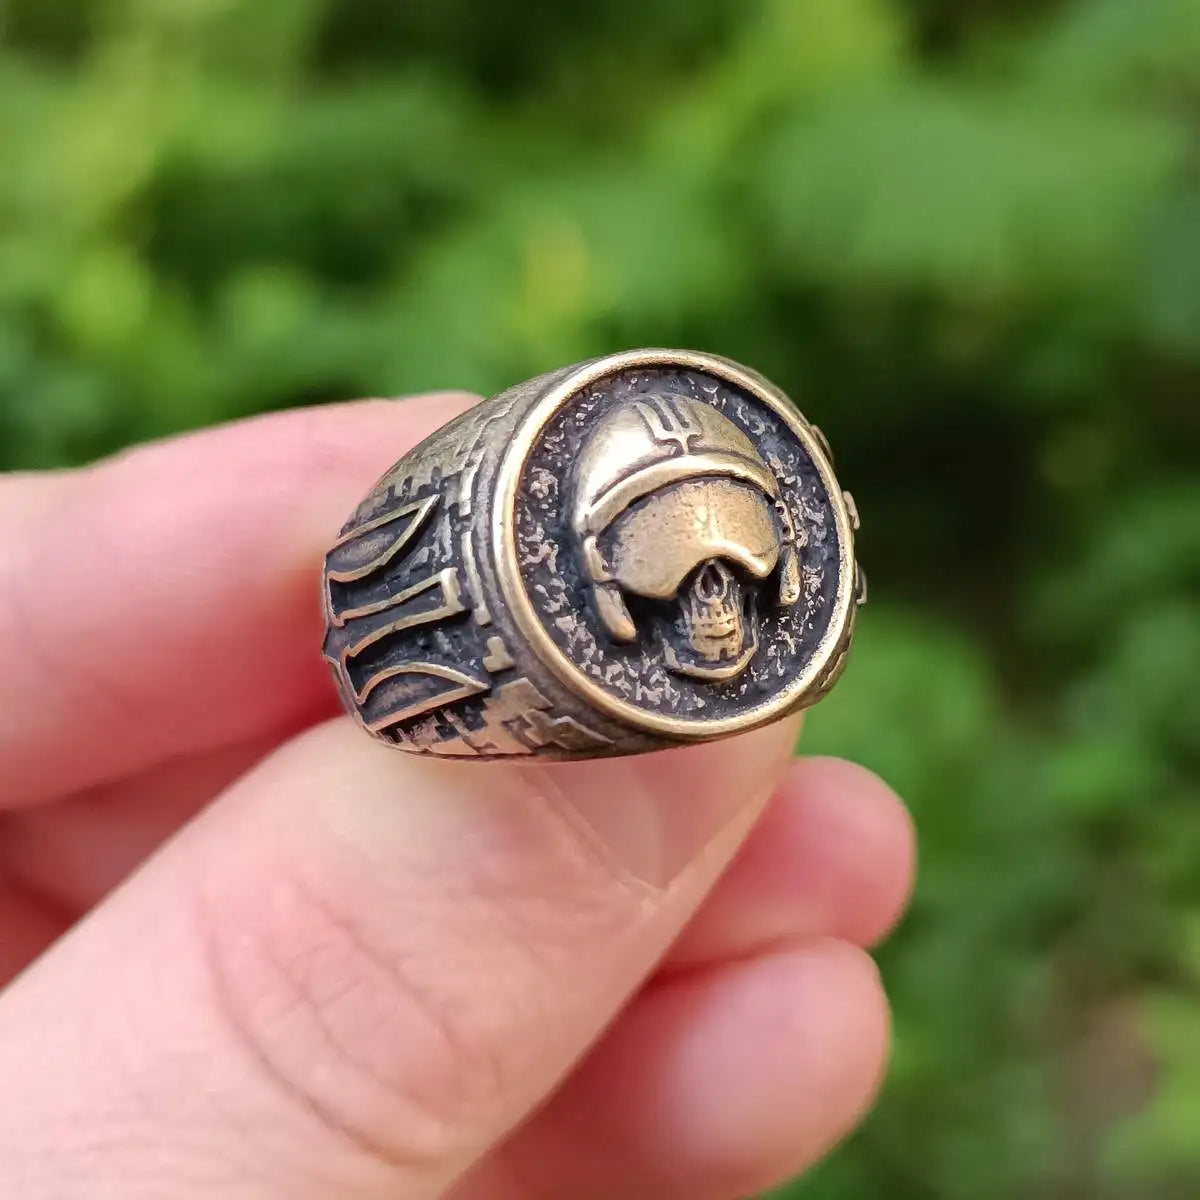 The Ghost of Kyiv signet ring from bronze   